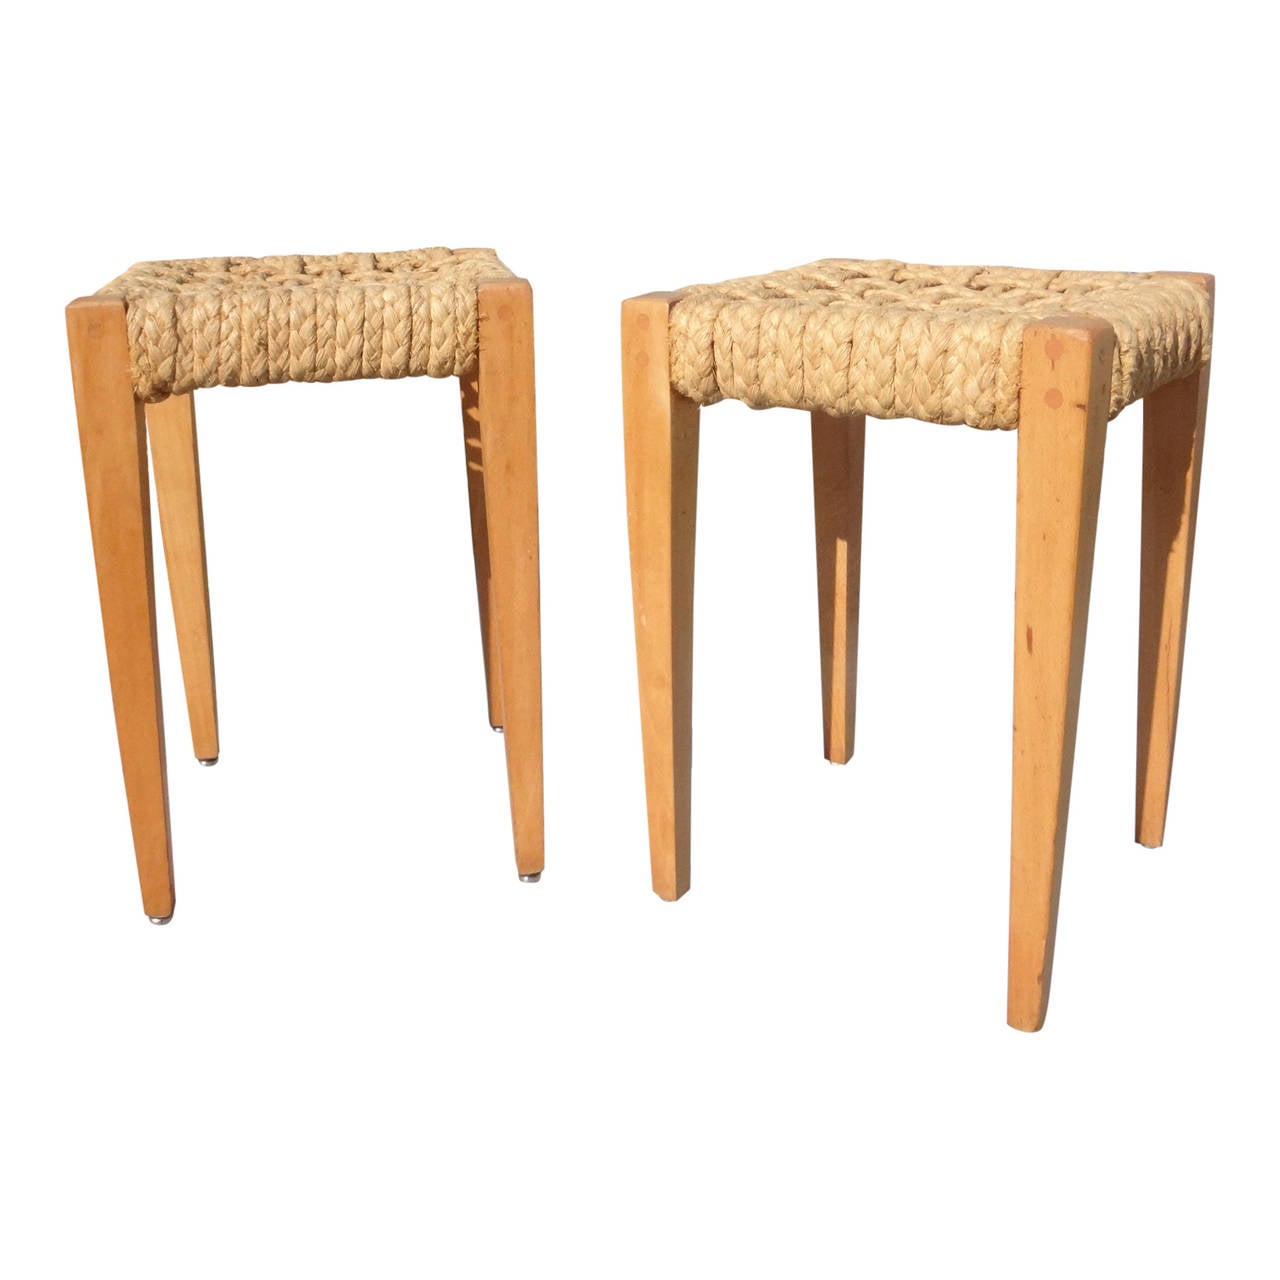 Pair of wood and rope raphia web stools by Adrien Audoux and Frida Minnet. As shown on picture 5 one leg of one of the stools is slightly bent inwards.